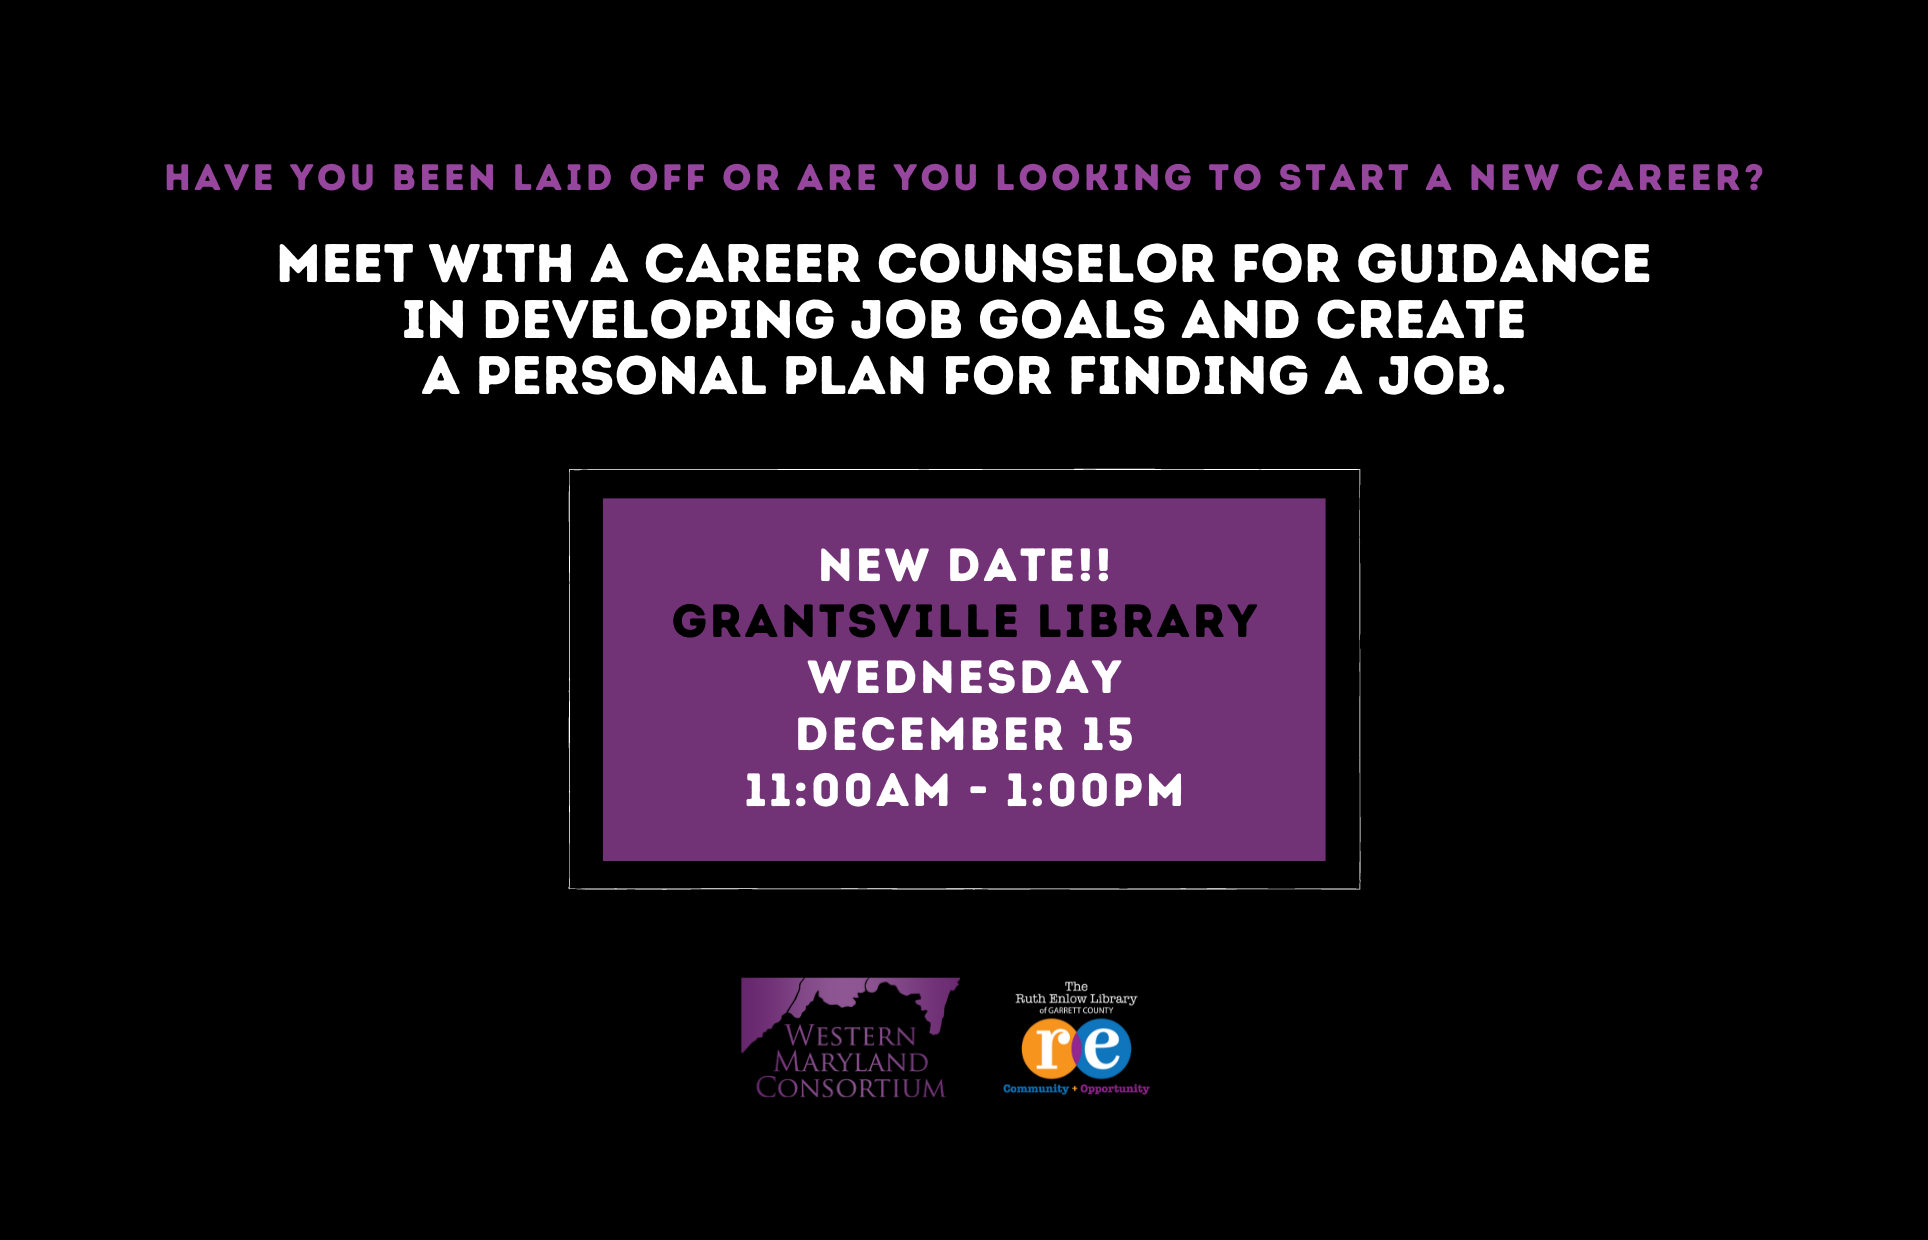 Meet with a Career Counselor (Western Maryland Consortium) (Friendsville)